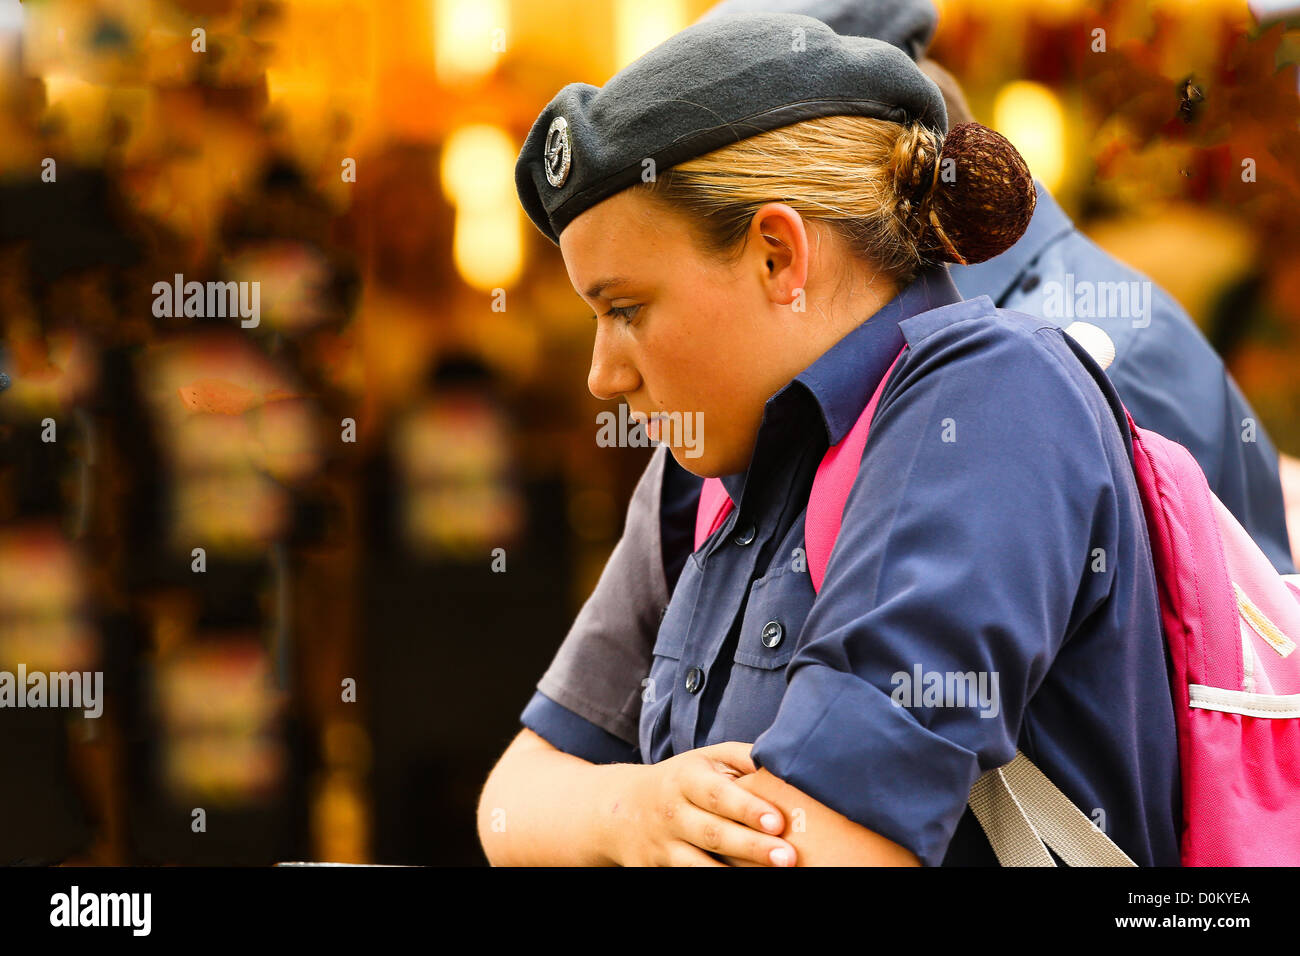 Army girl concentrated Stock Photo